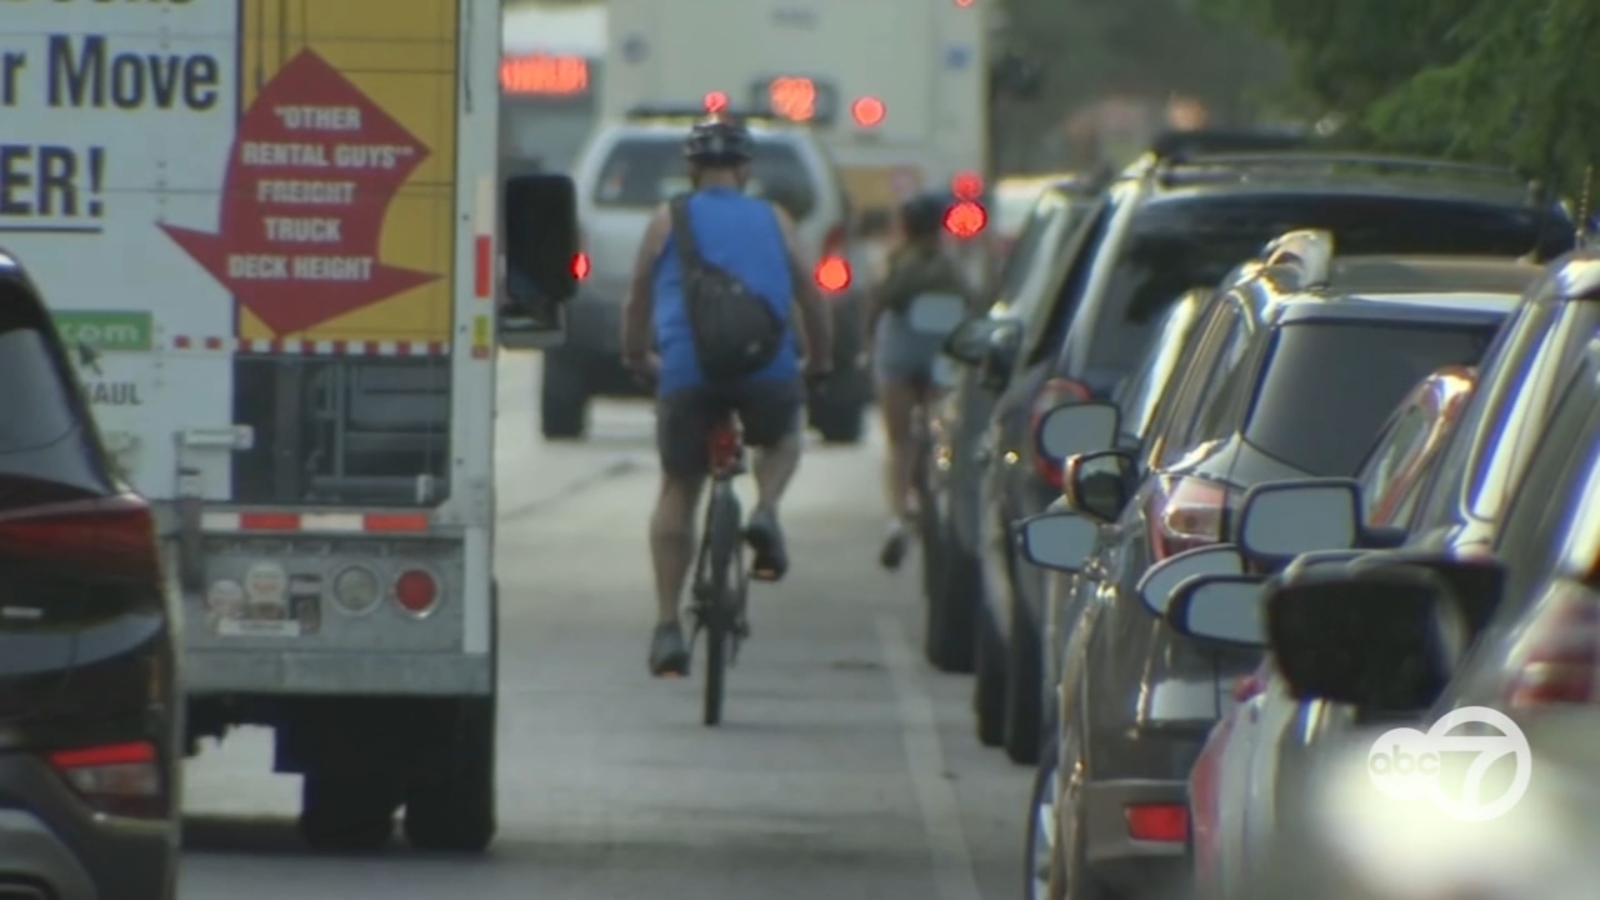 Chicago Department of Transportation, or CDOT, says it’s working to make city safer for bike riders [Video]